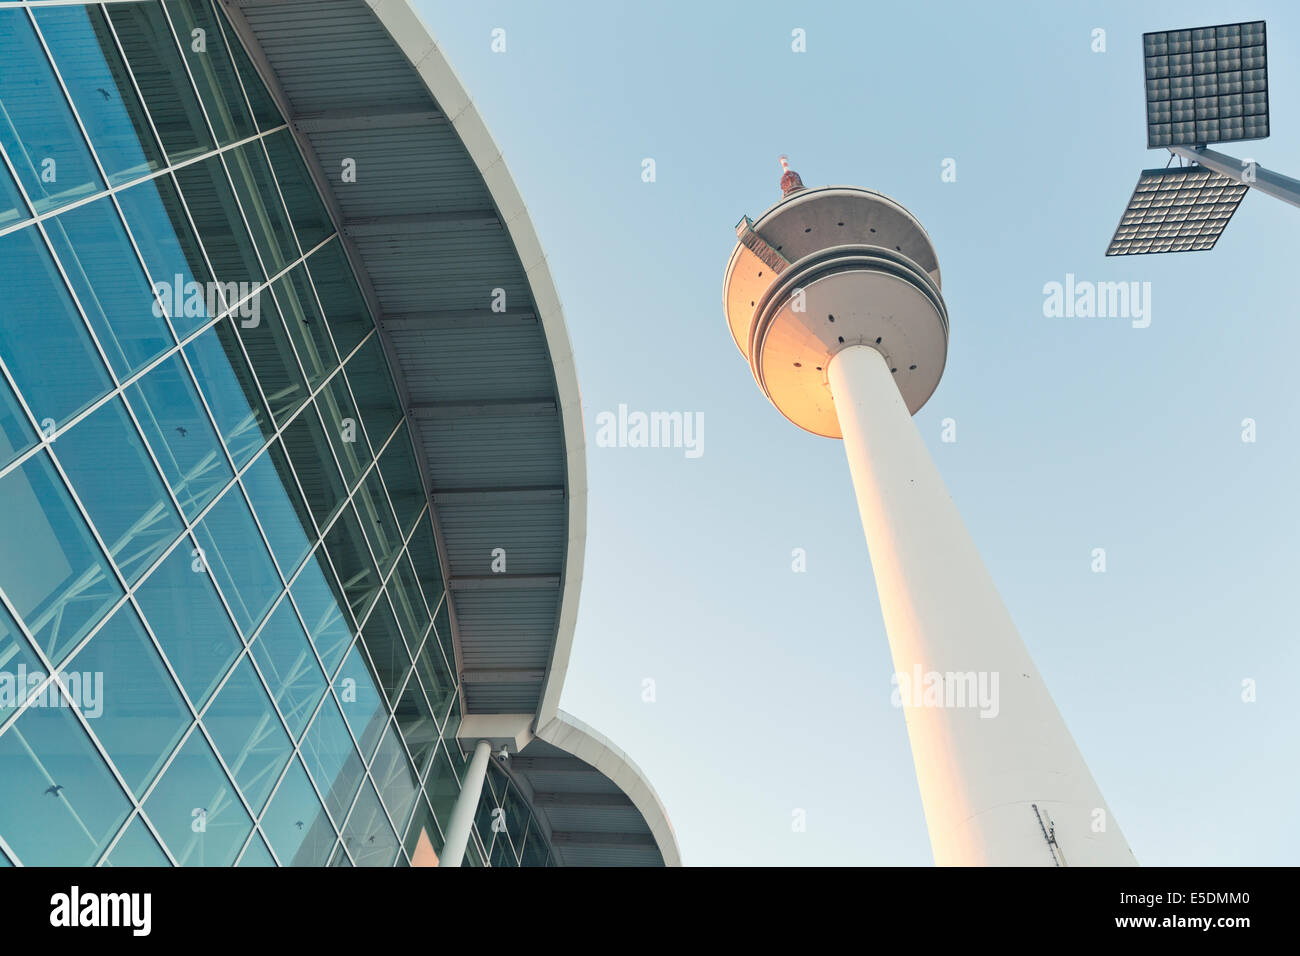 Germany, Hamburg, view to television tower and trade fair building from below Stock Photo